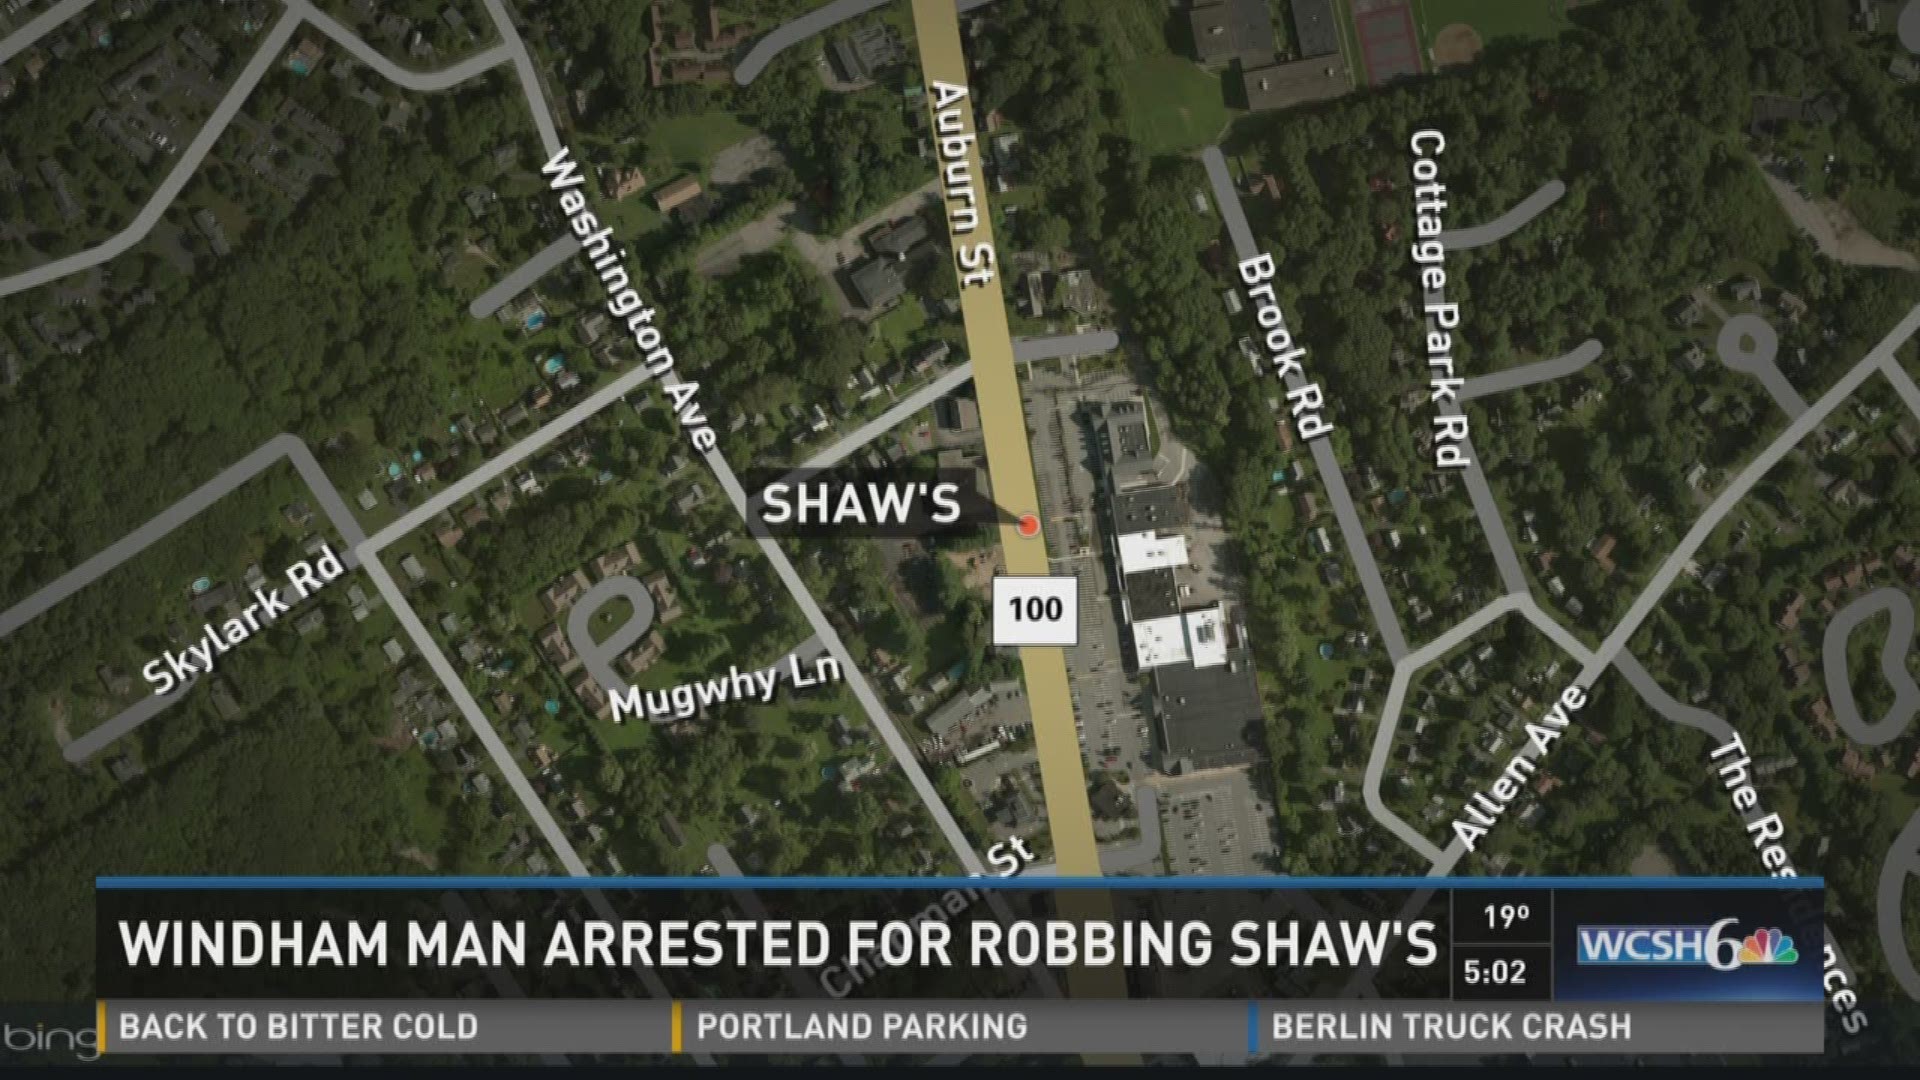 Windham man arrested for robbing Shaw's